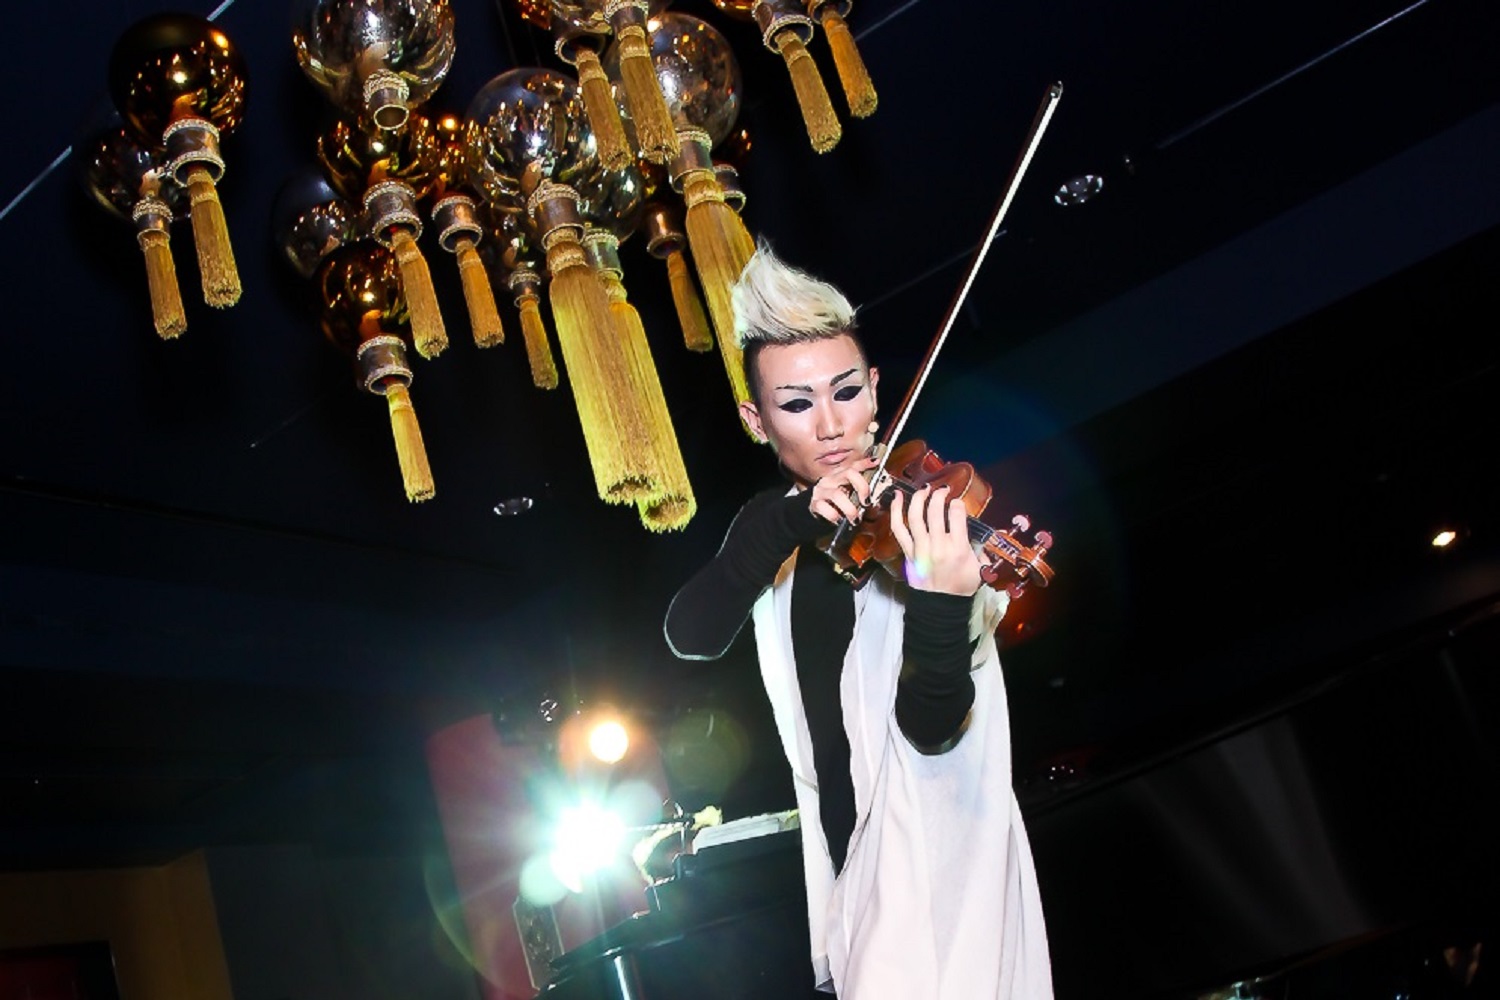 Musician Hahn-Bin performs after dinner for Gala patrons (Tony Powell)